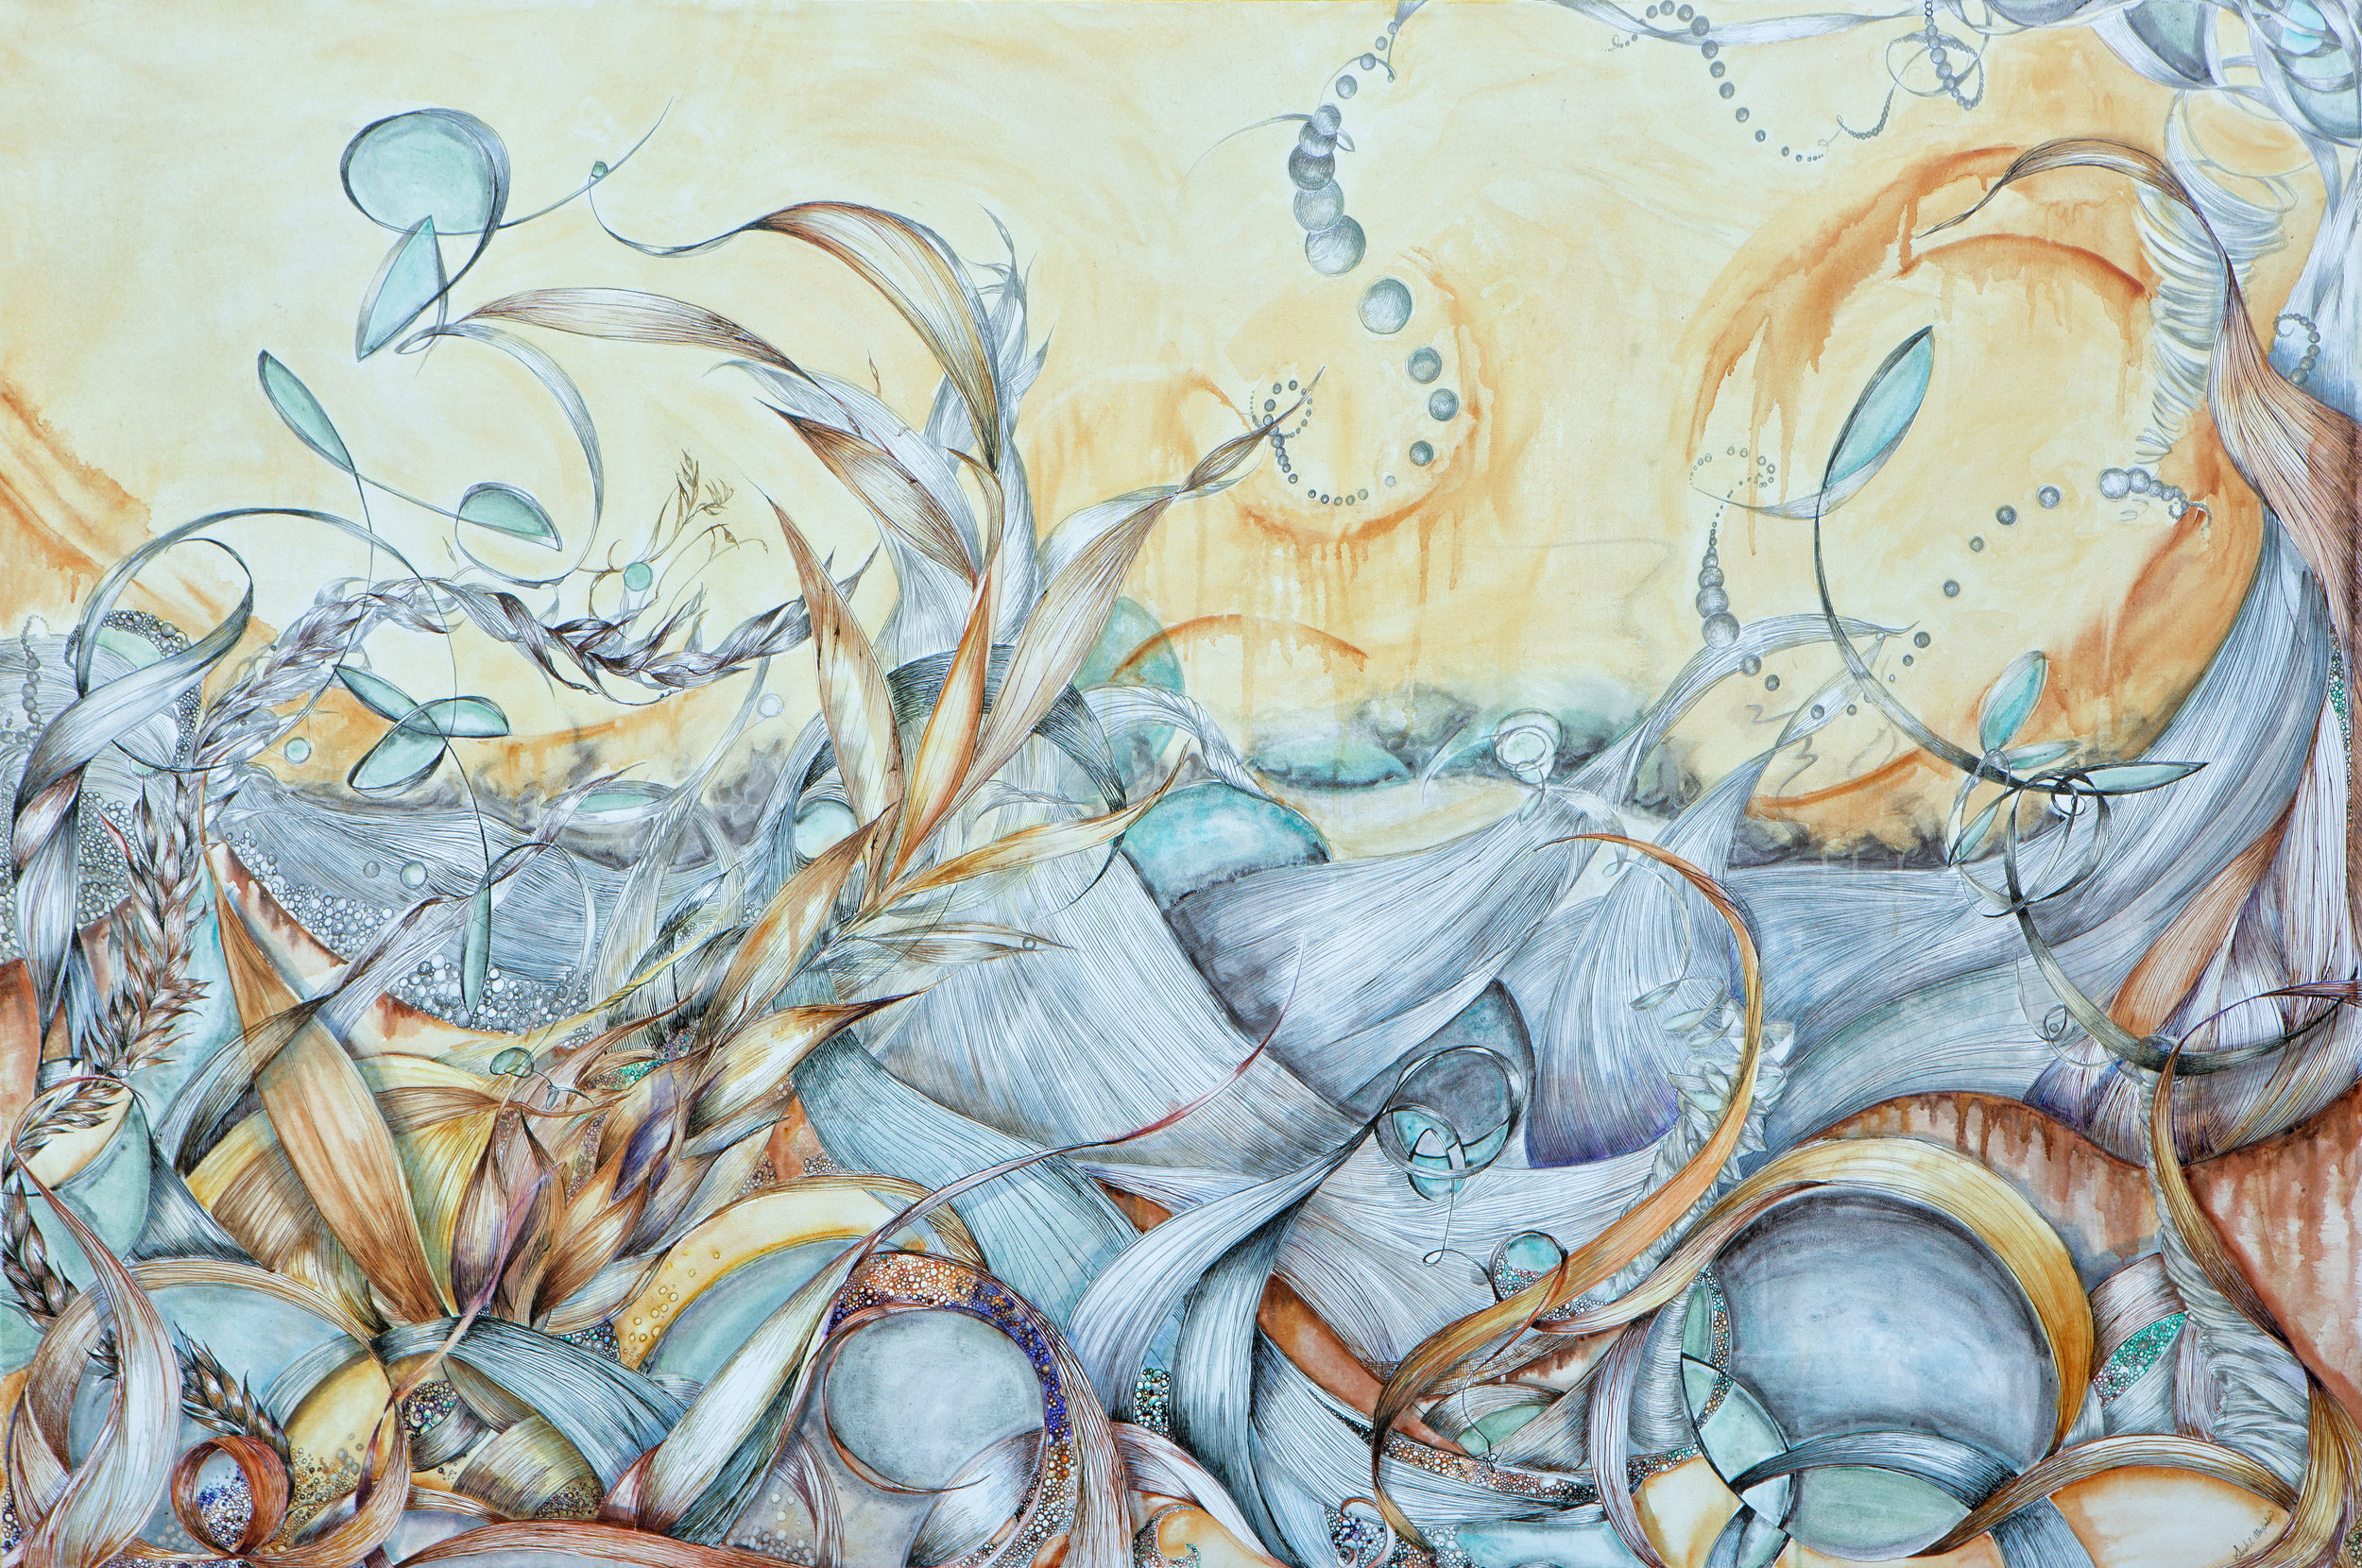    Somewhere Else Instead    ink and watercolor on canvas, 52 x 78 inches 